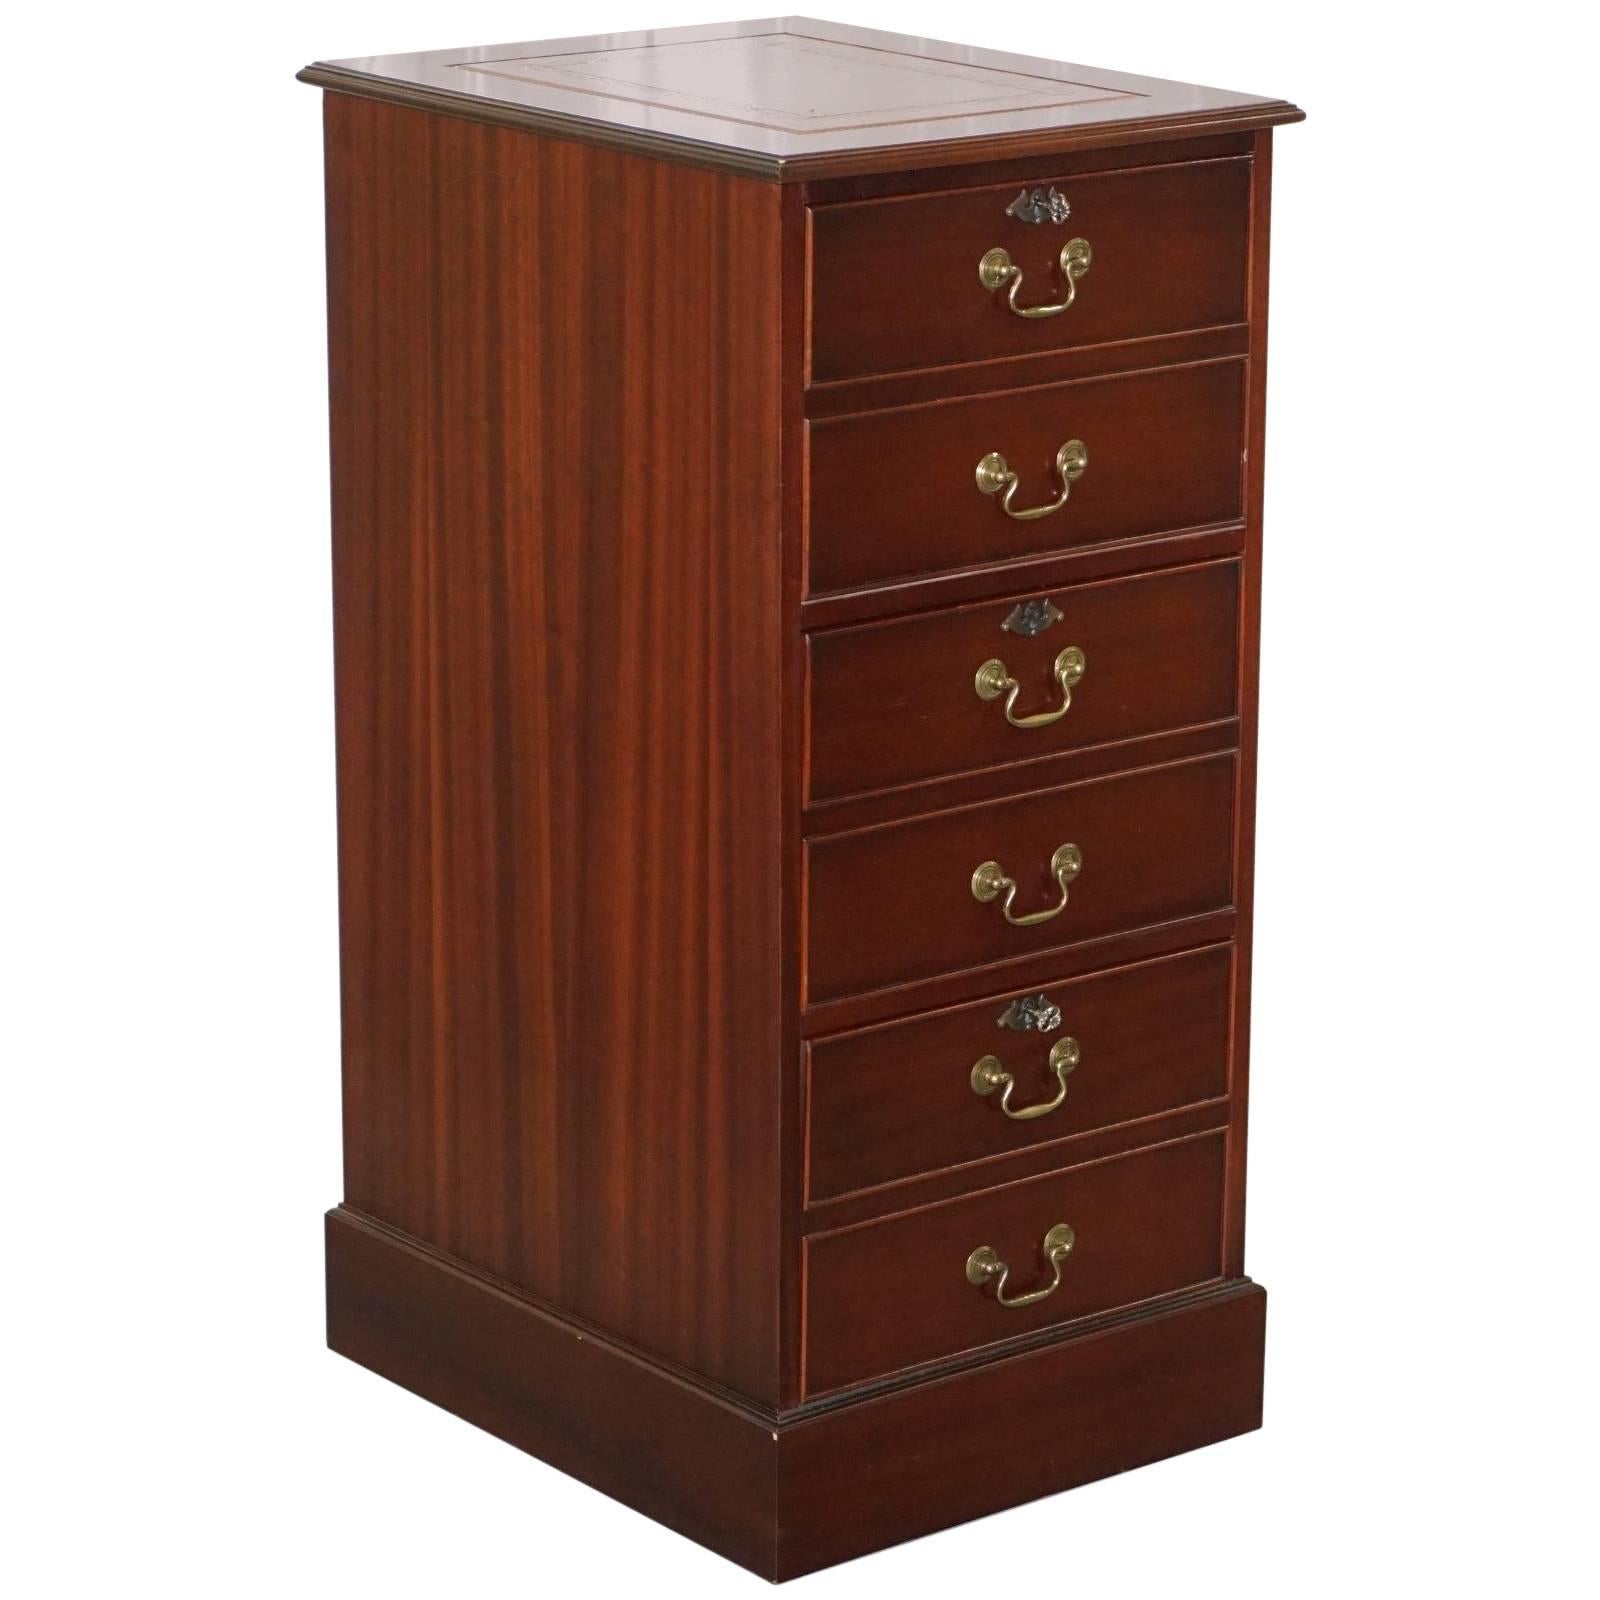 Three-Drawer Tall Mahogany Filing Cabinet Brown Leather Top